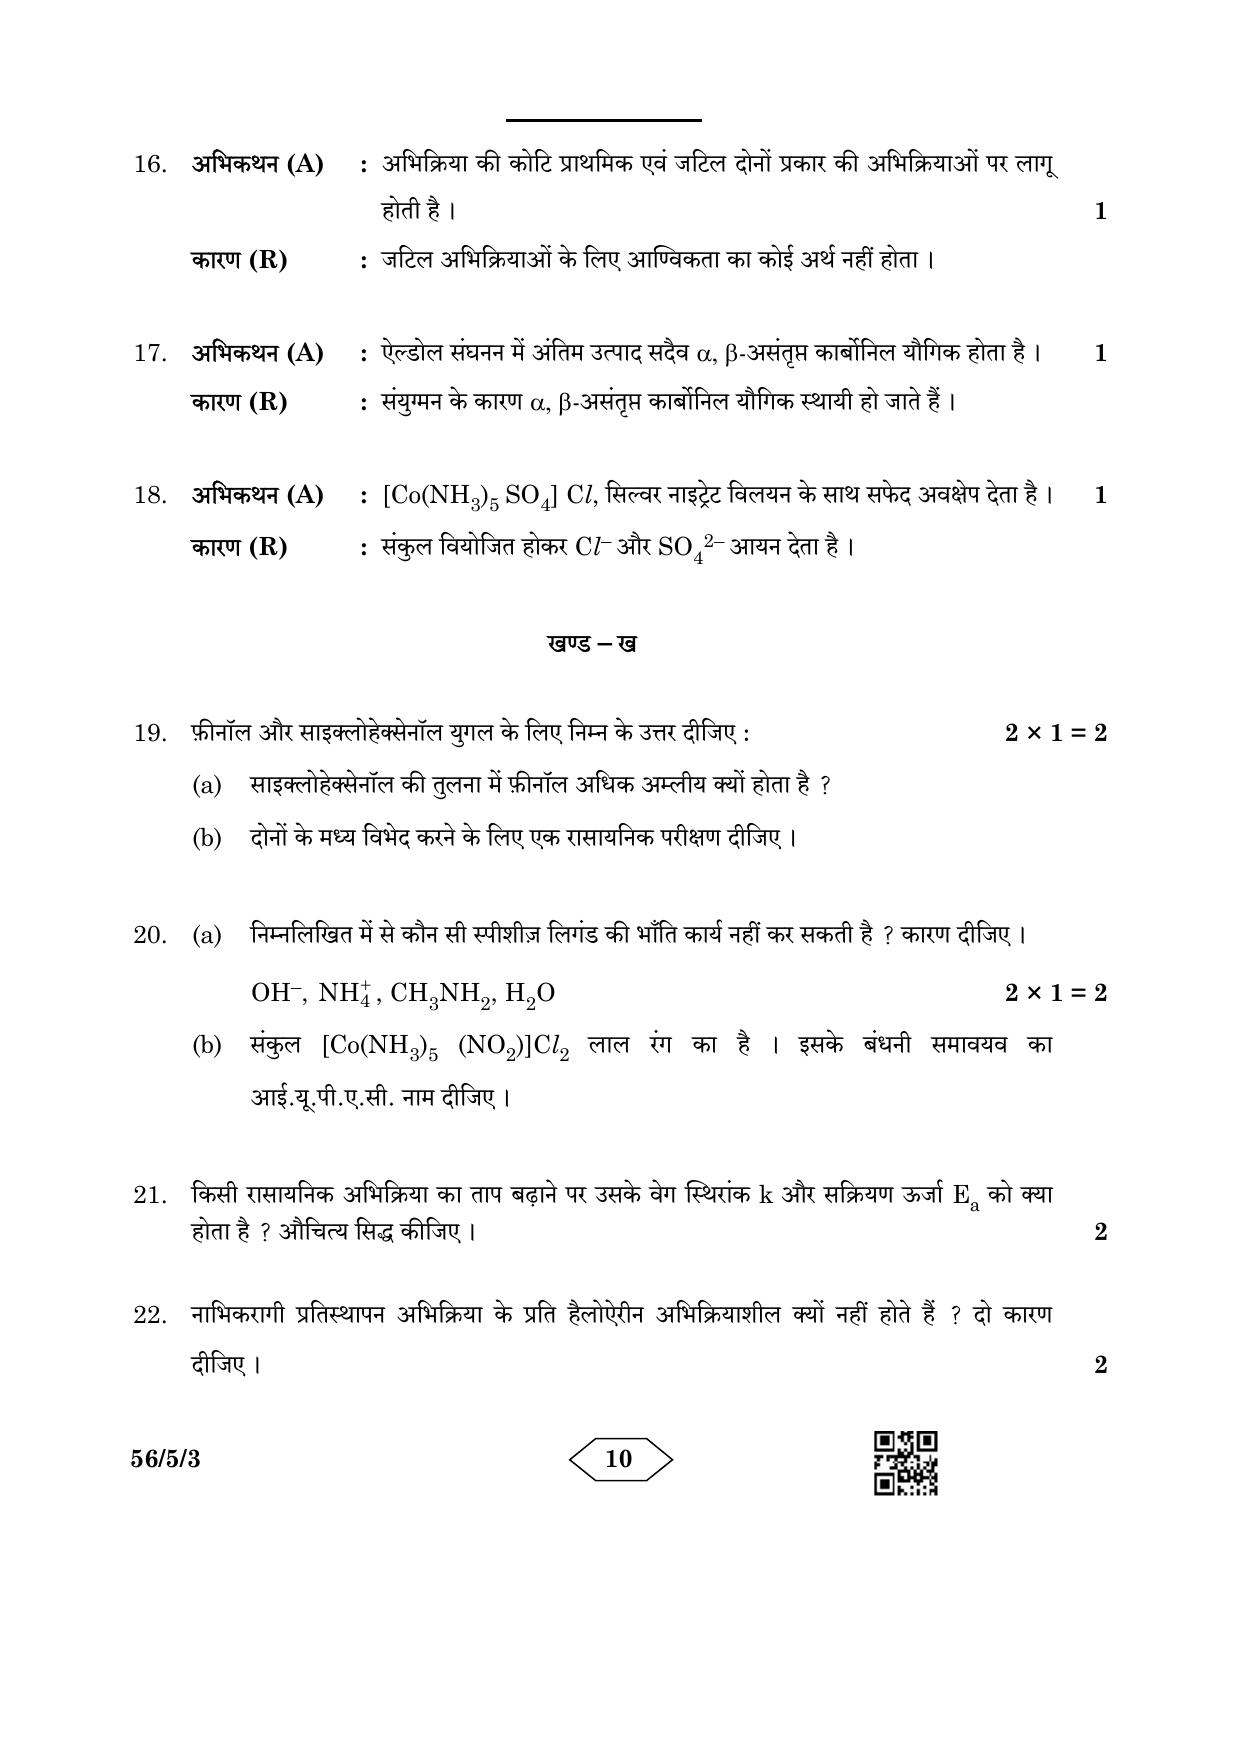 CBSE Class 12 56-5-3 Chemistry 2023 Question Paper - Page 10